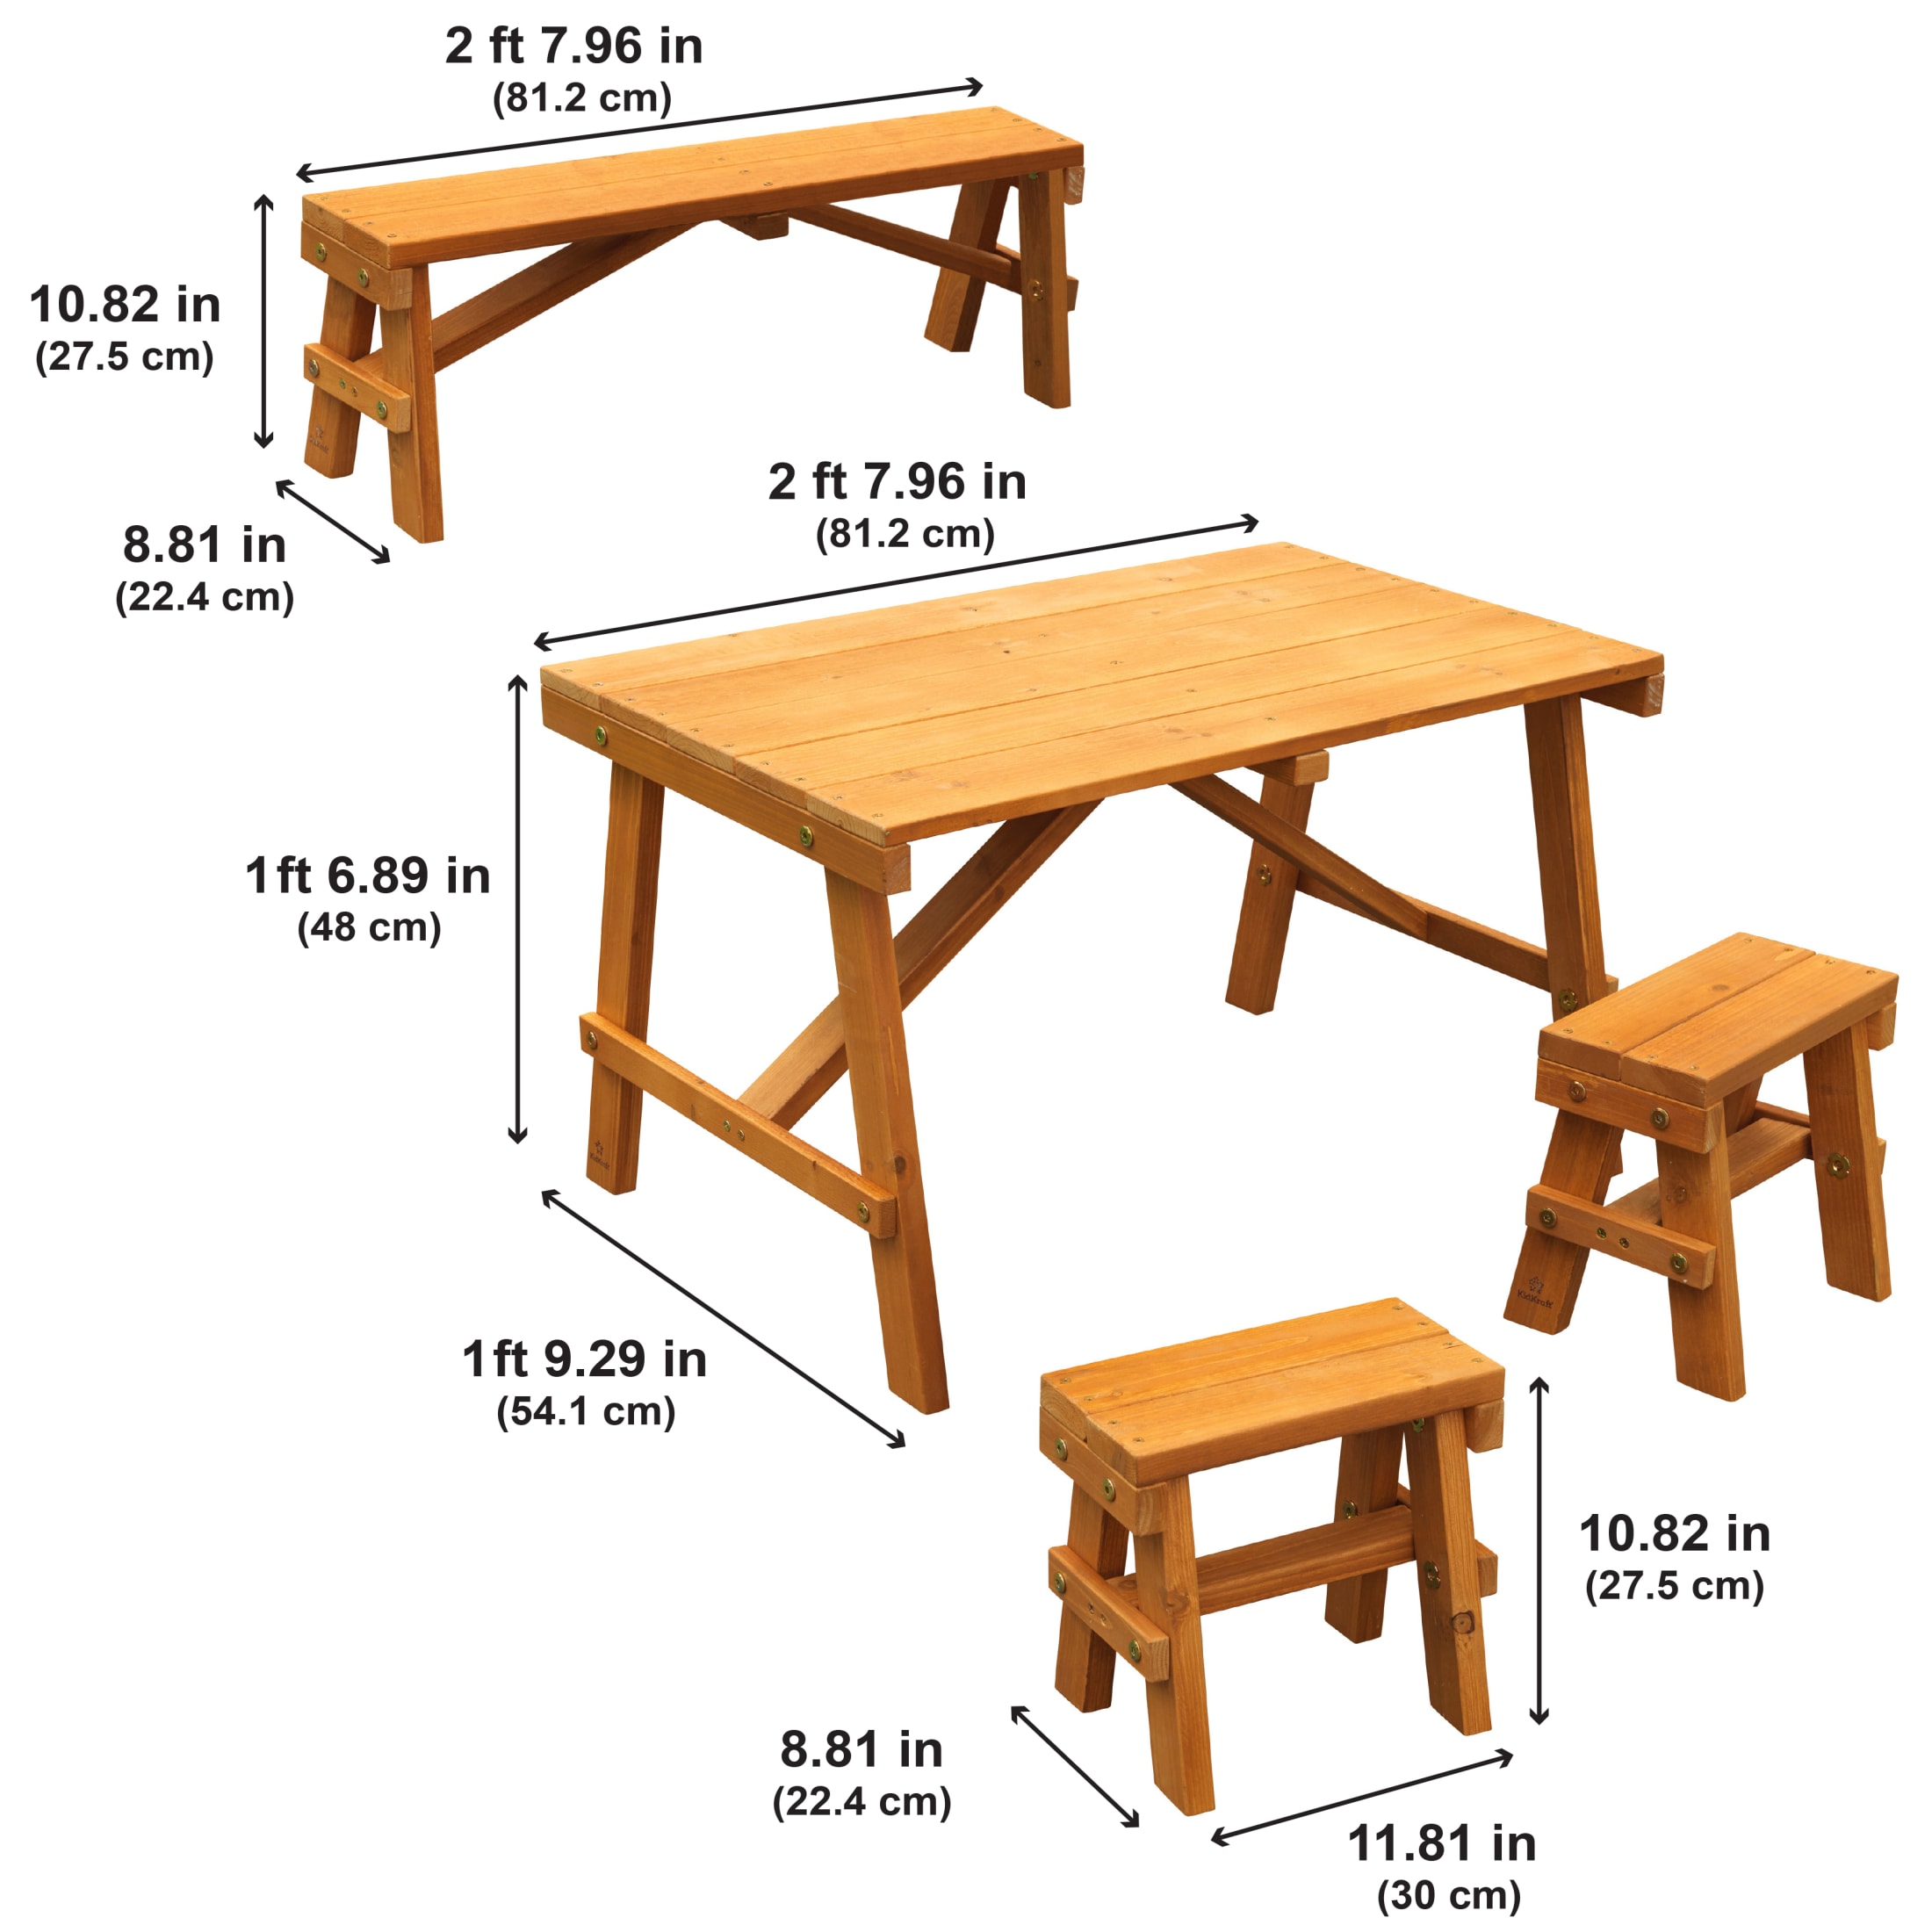 KidKraft Wooden Outdoor Picnic Table with Three Benches, Kids Patio Furniture, Amber - image 5 of 5